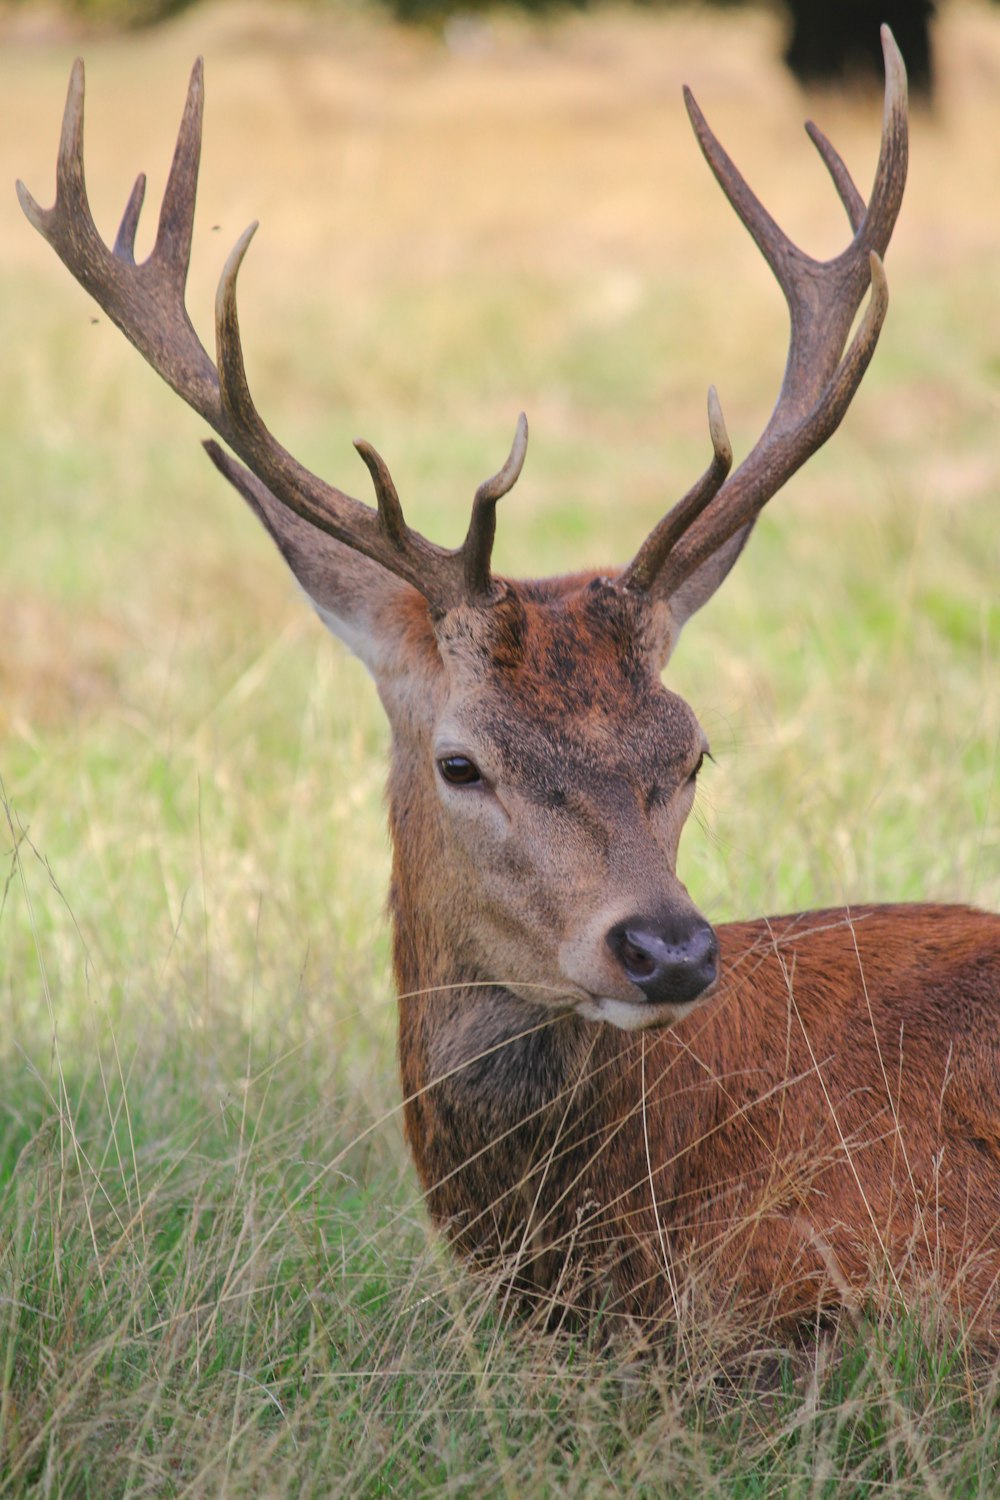 a deer with antlers in a grassy field